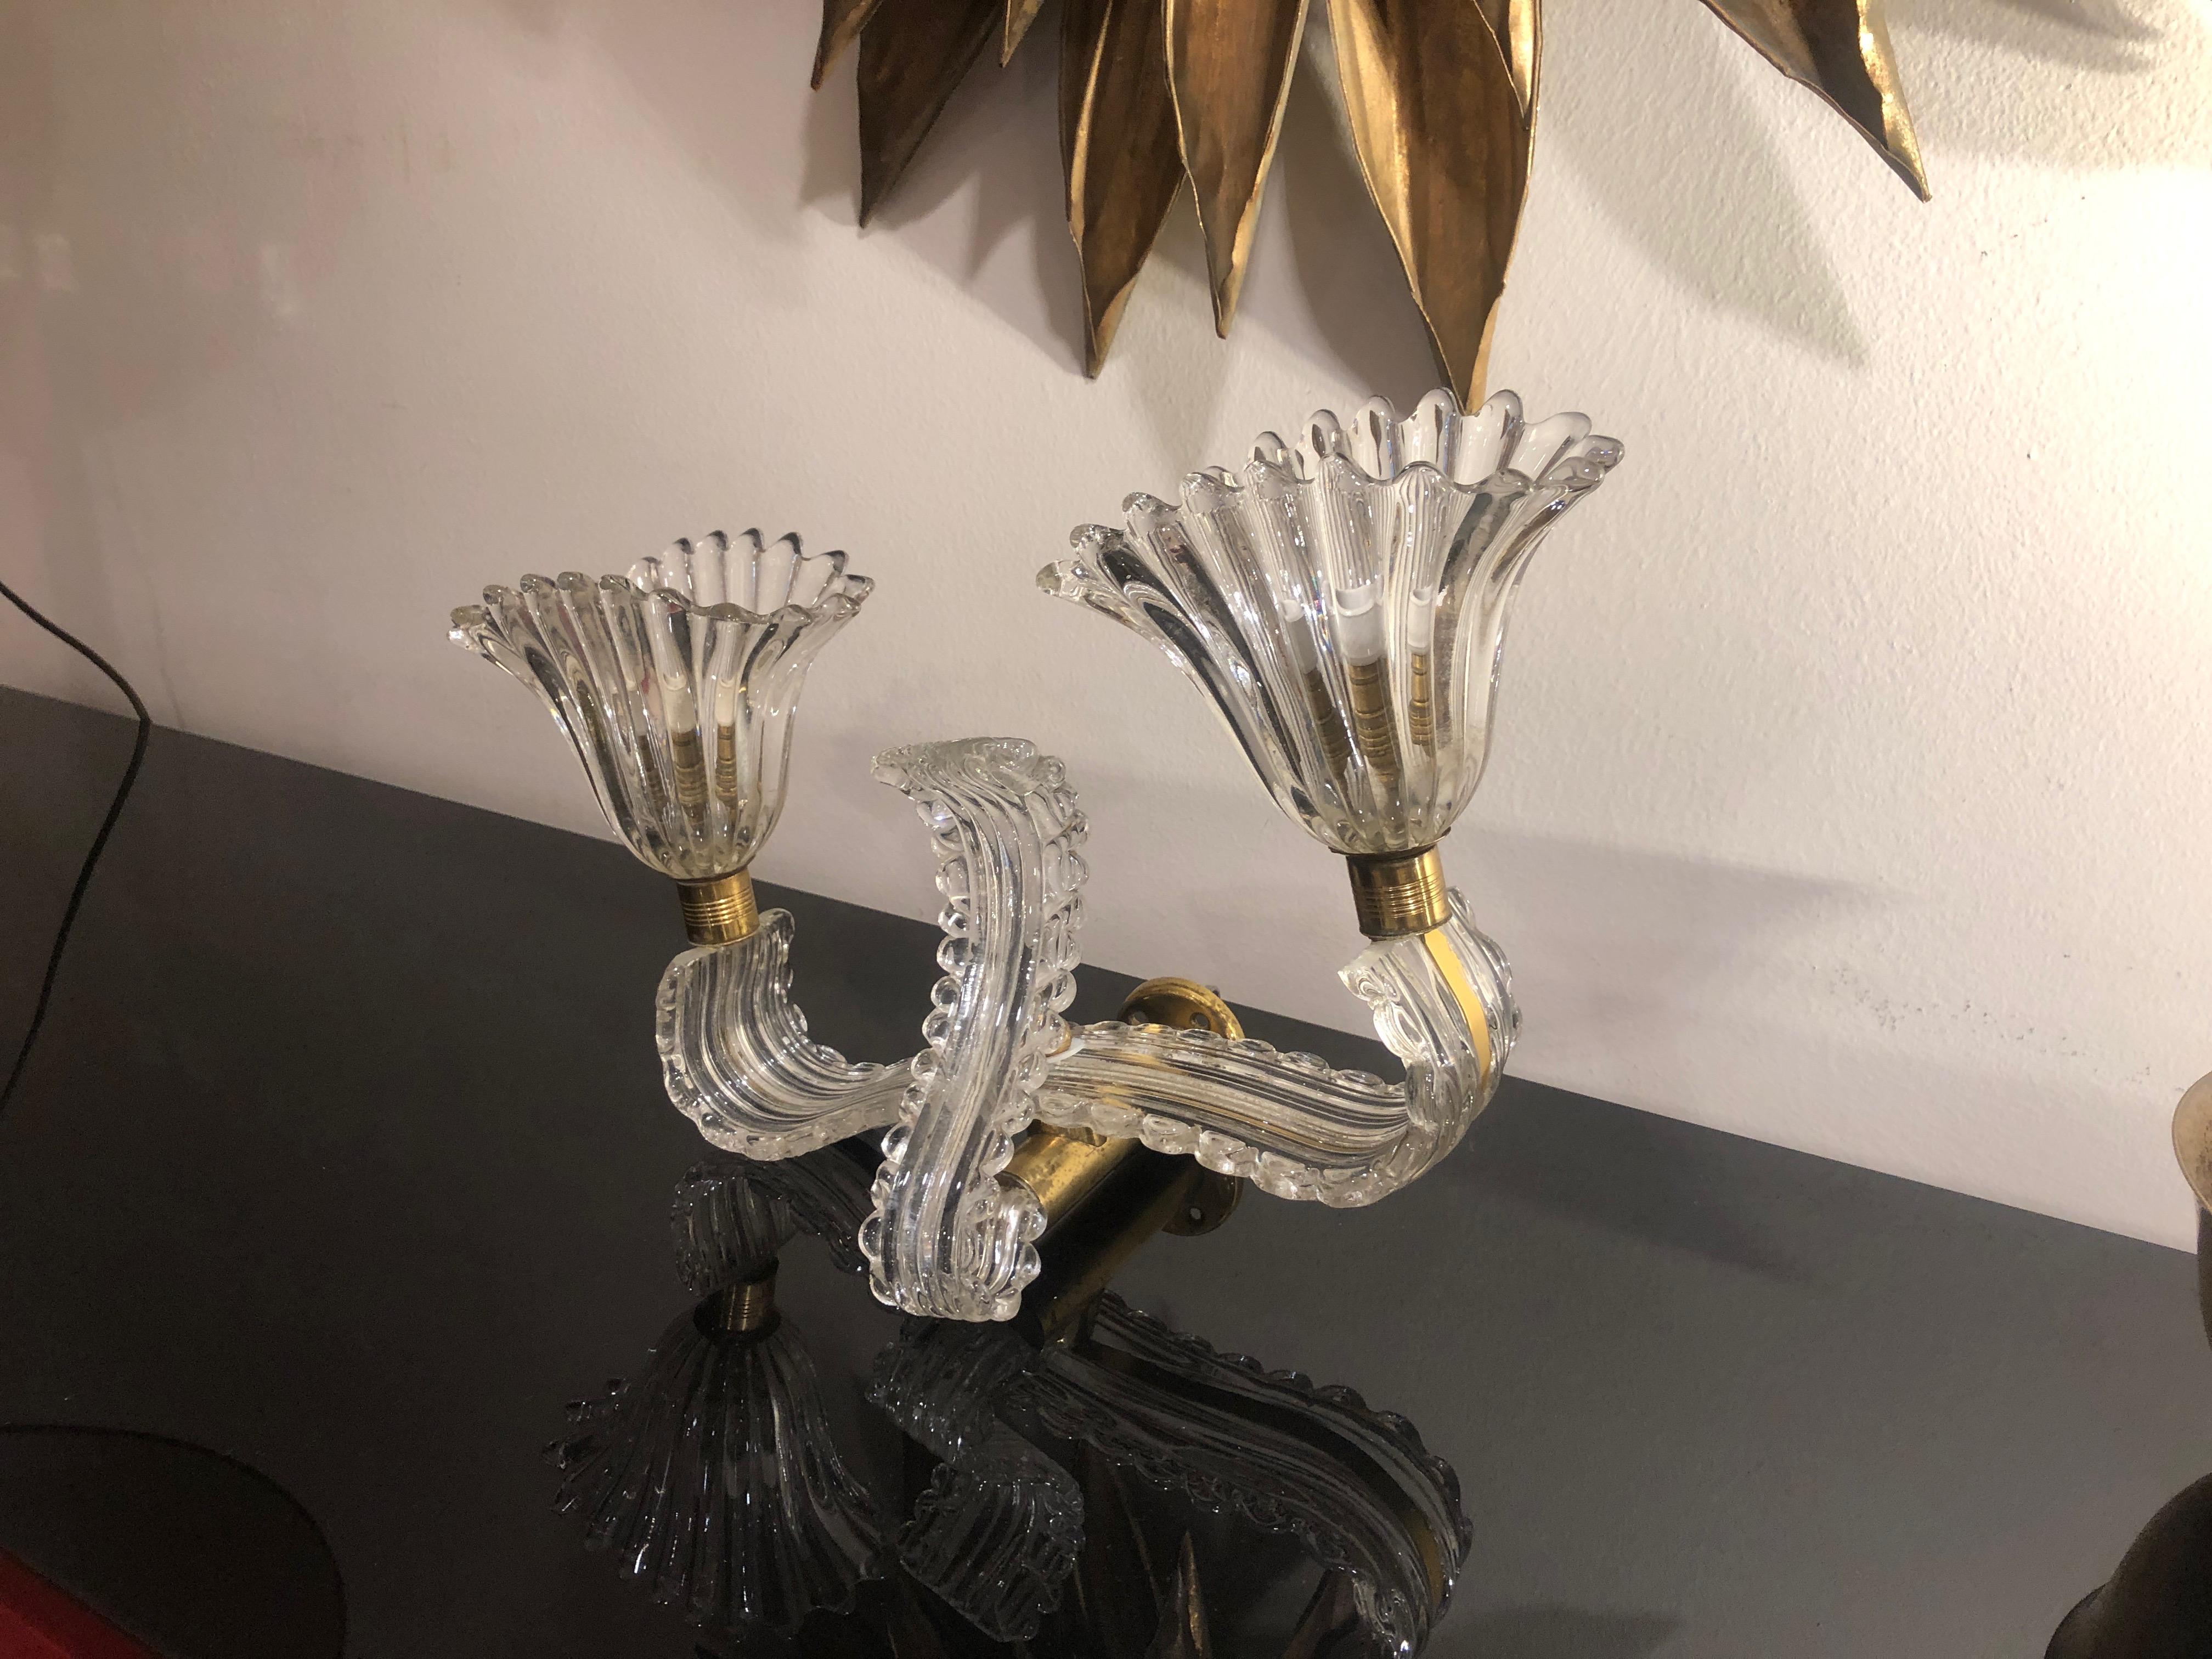 1940s glass and brass Barovier style double light wall sconce
Rewired, ready to be hang. 
No structural damages, no cracks, the brass shows the original patina with wears coherent with age.
Dimensions: W 40 CM, H 30 CM, D 20 CM
A video is available